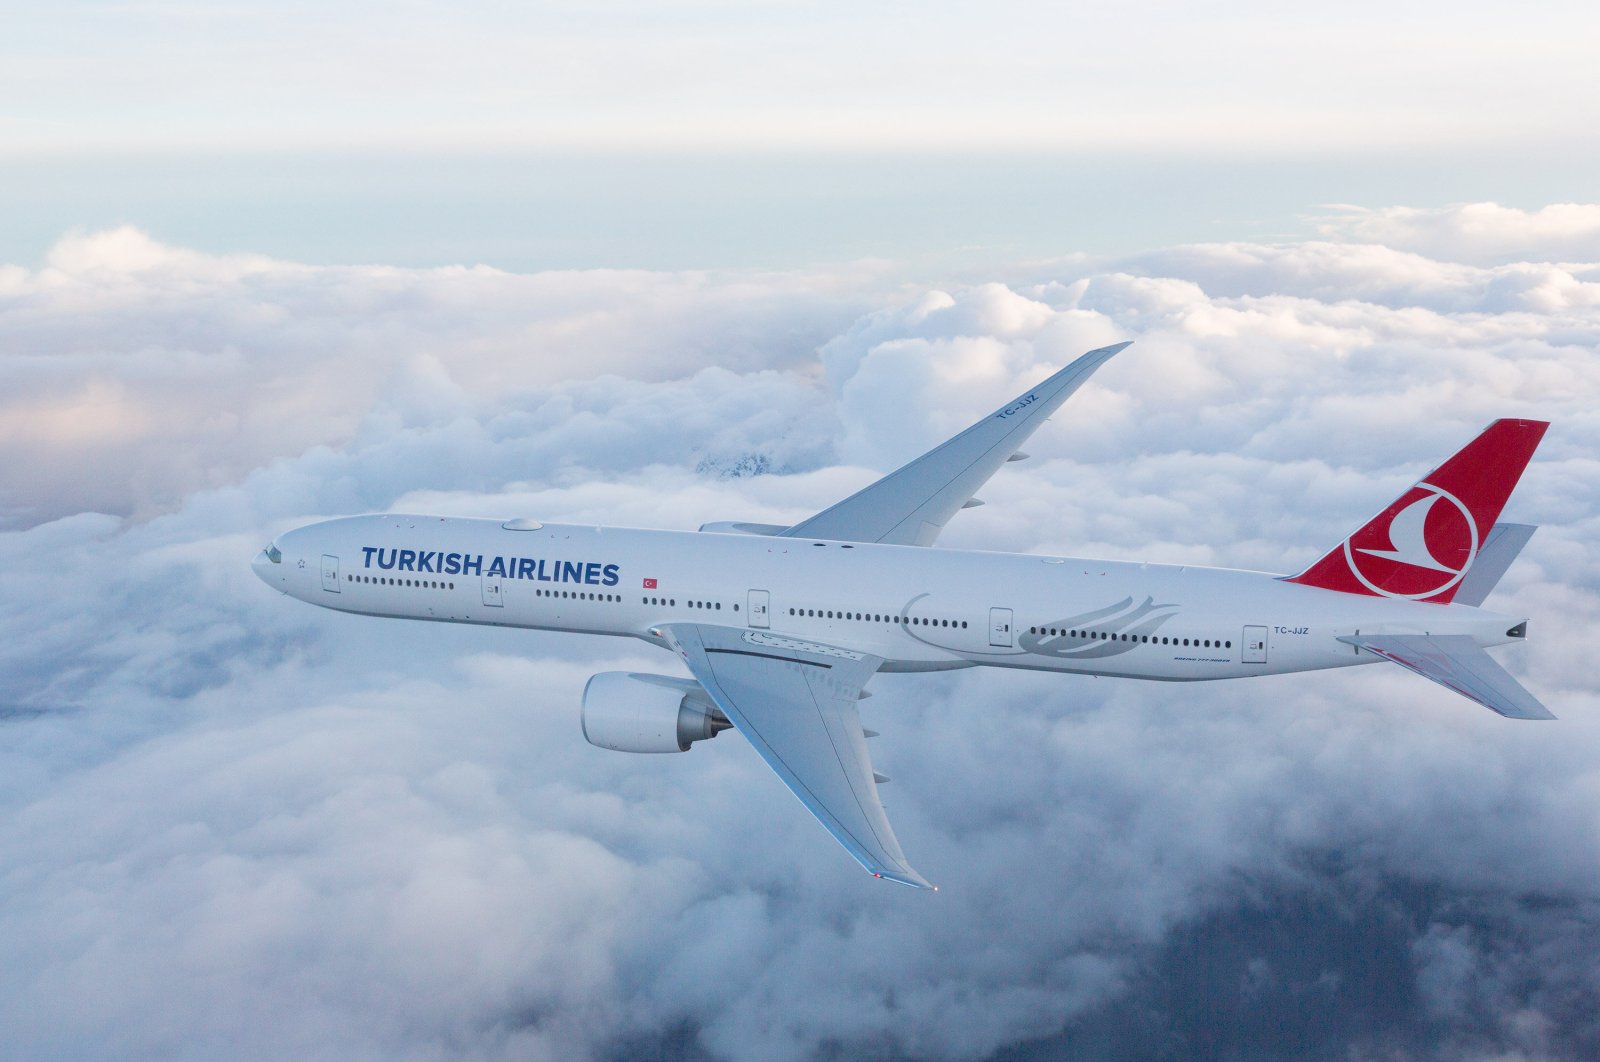 Turkish Airlines has drafted a plan for resuming flights after a halt caused by coronavirus restrictions. (DHA Photo)